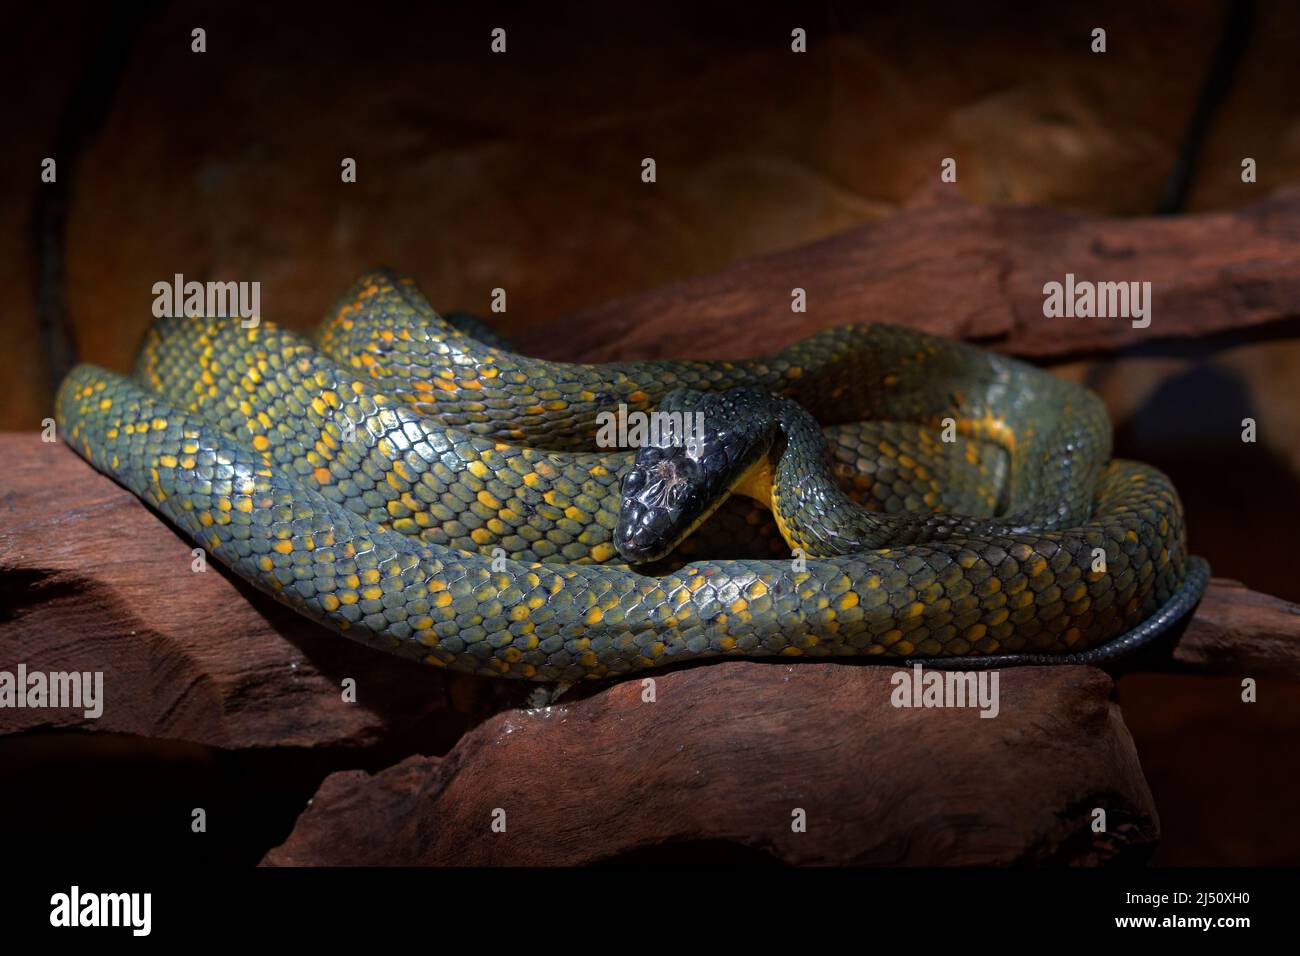 Puffing Snake, Pseustes poecilonotus, in dark habitat. Non venomous snake in the nature habitat. Poisonous animal from South America. Northern bird sn Stock Photo